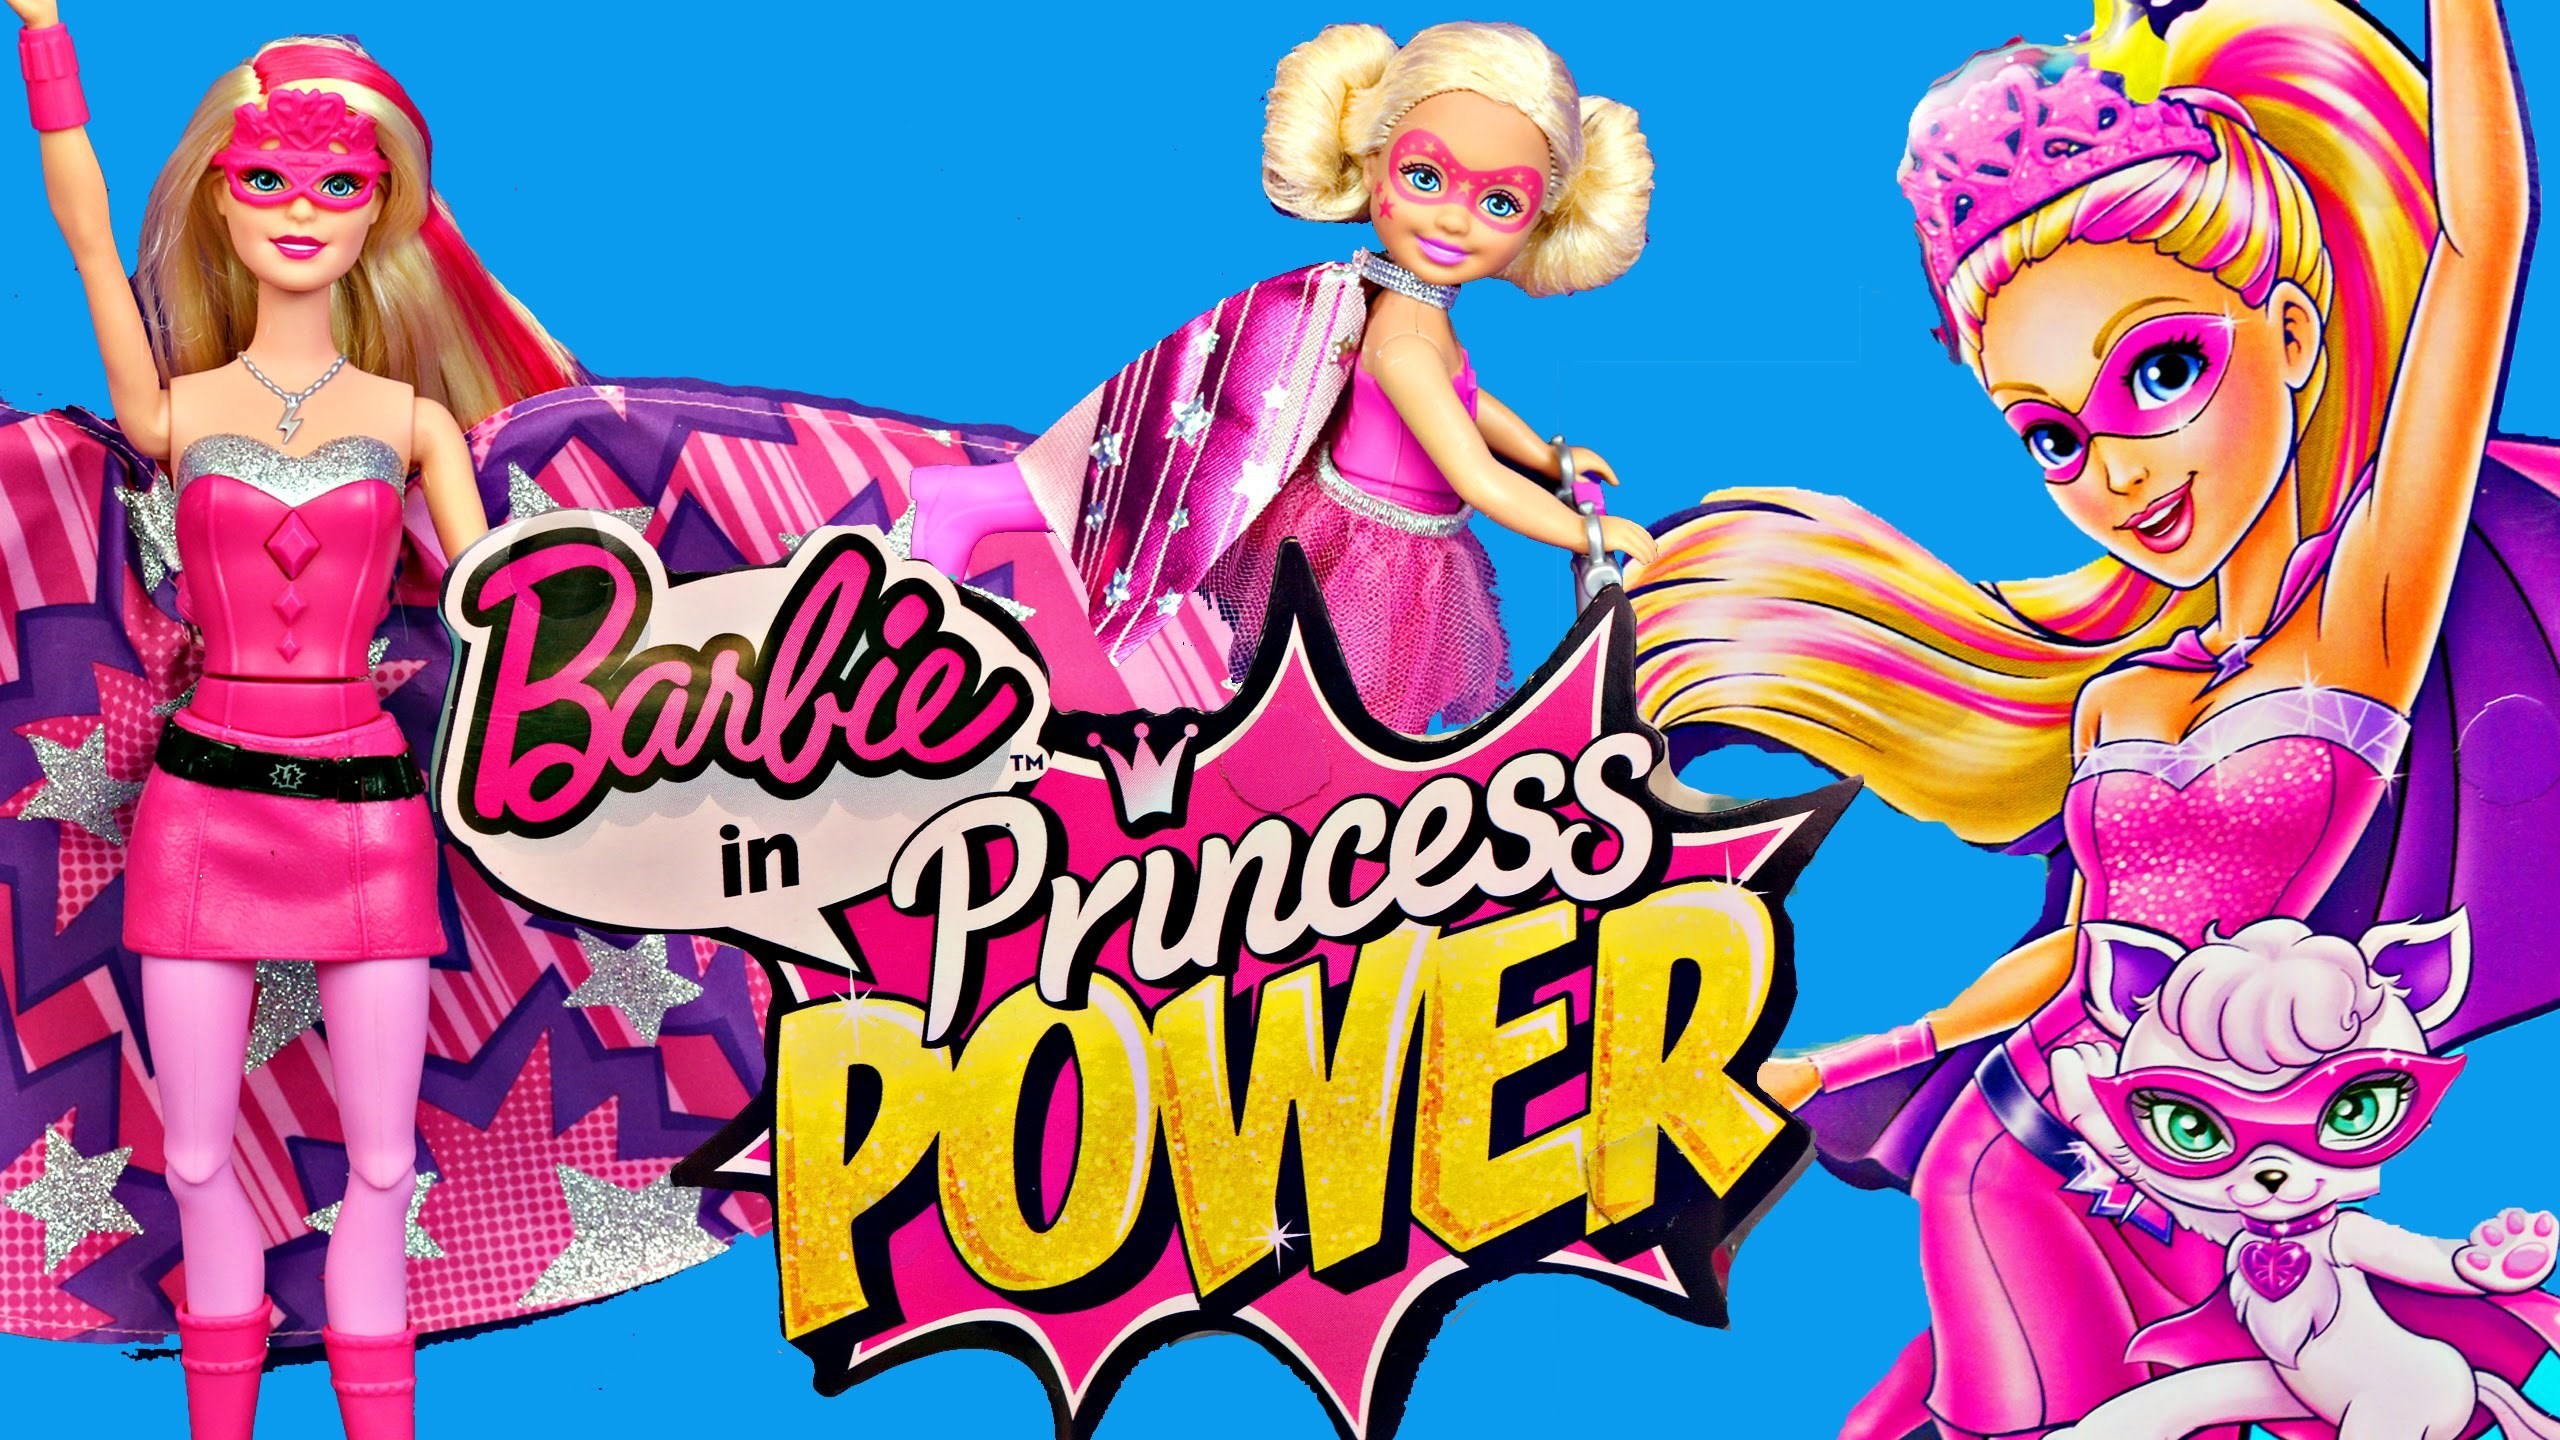 2560x1440 HQ RES barbie in princess power